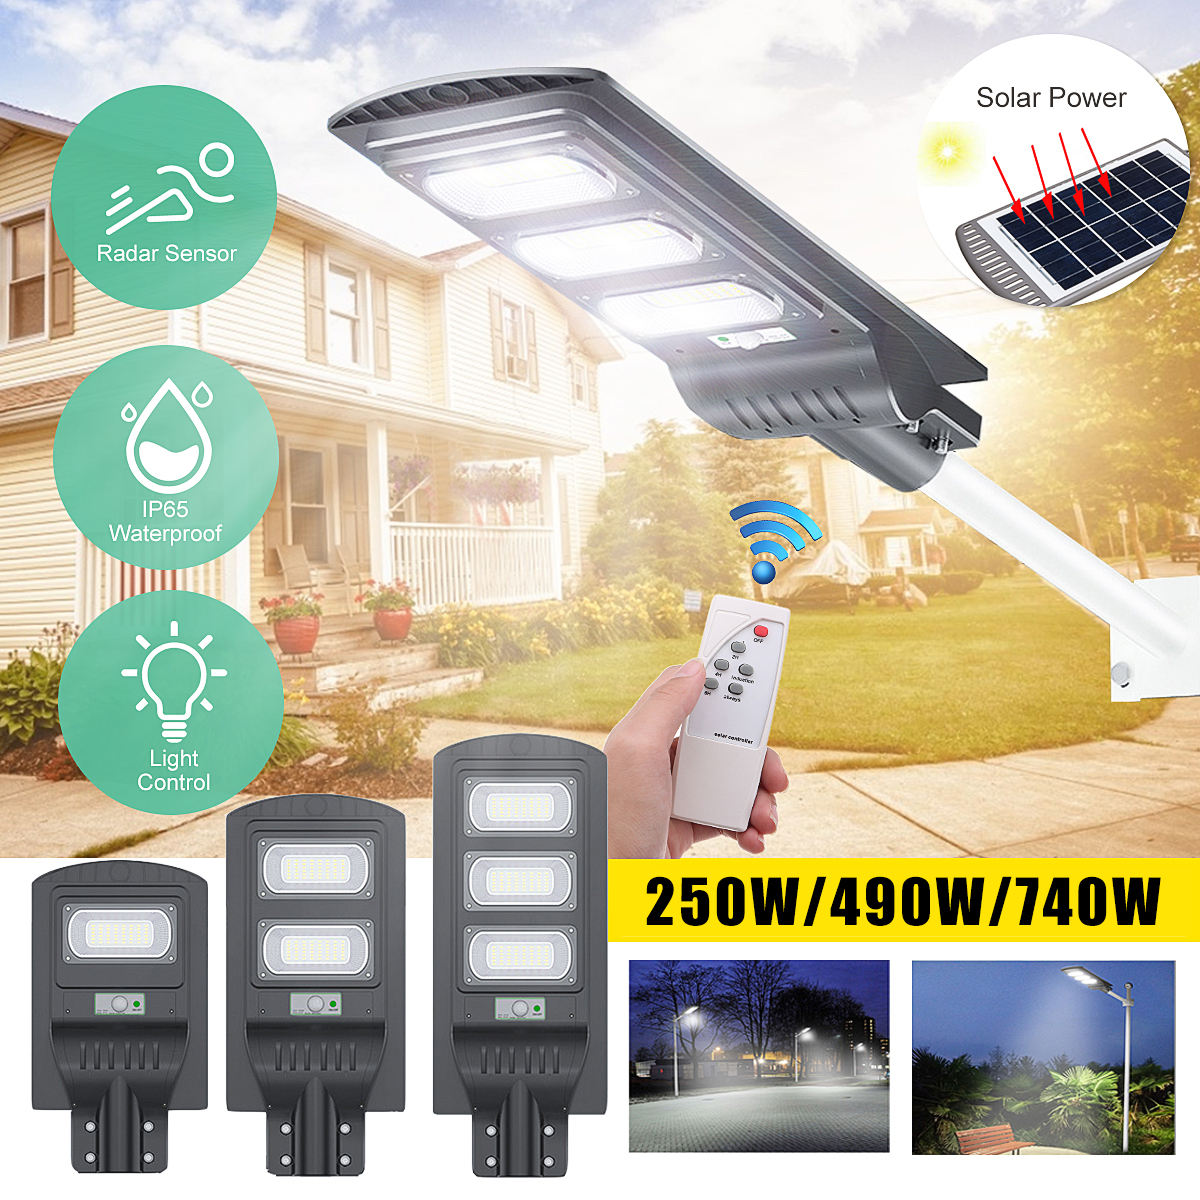 117234351-LED-Solar-Wall-Street-Light-PIR-Motion-Sensor-Outdoor-Lamp-with-Remote-Controller-1694433-1